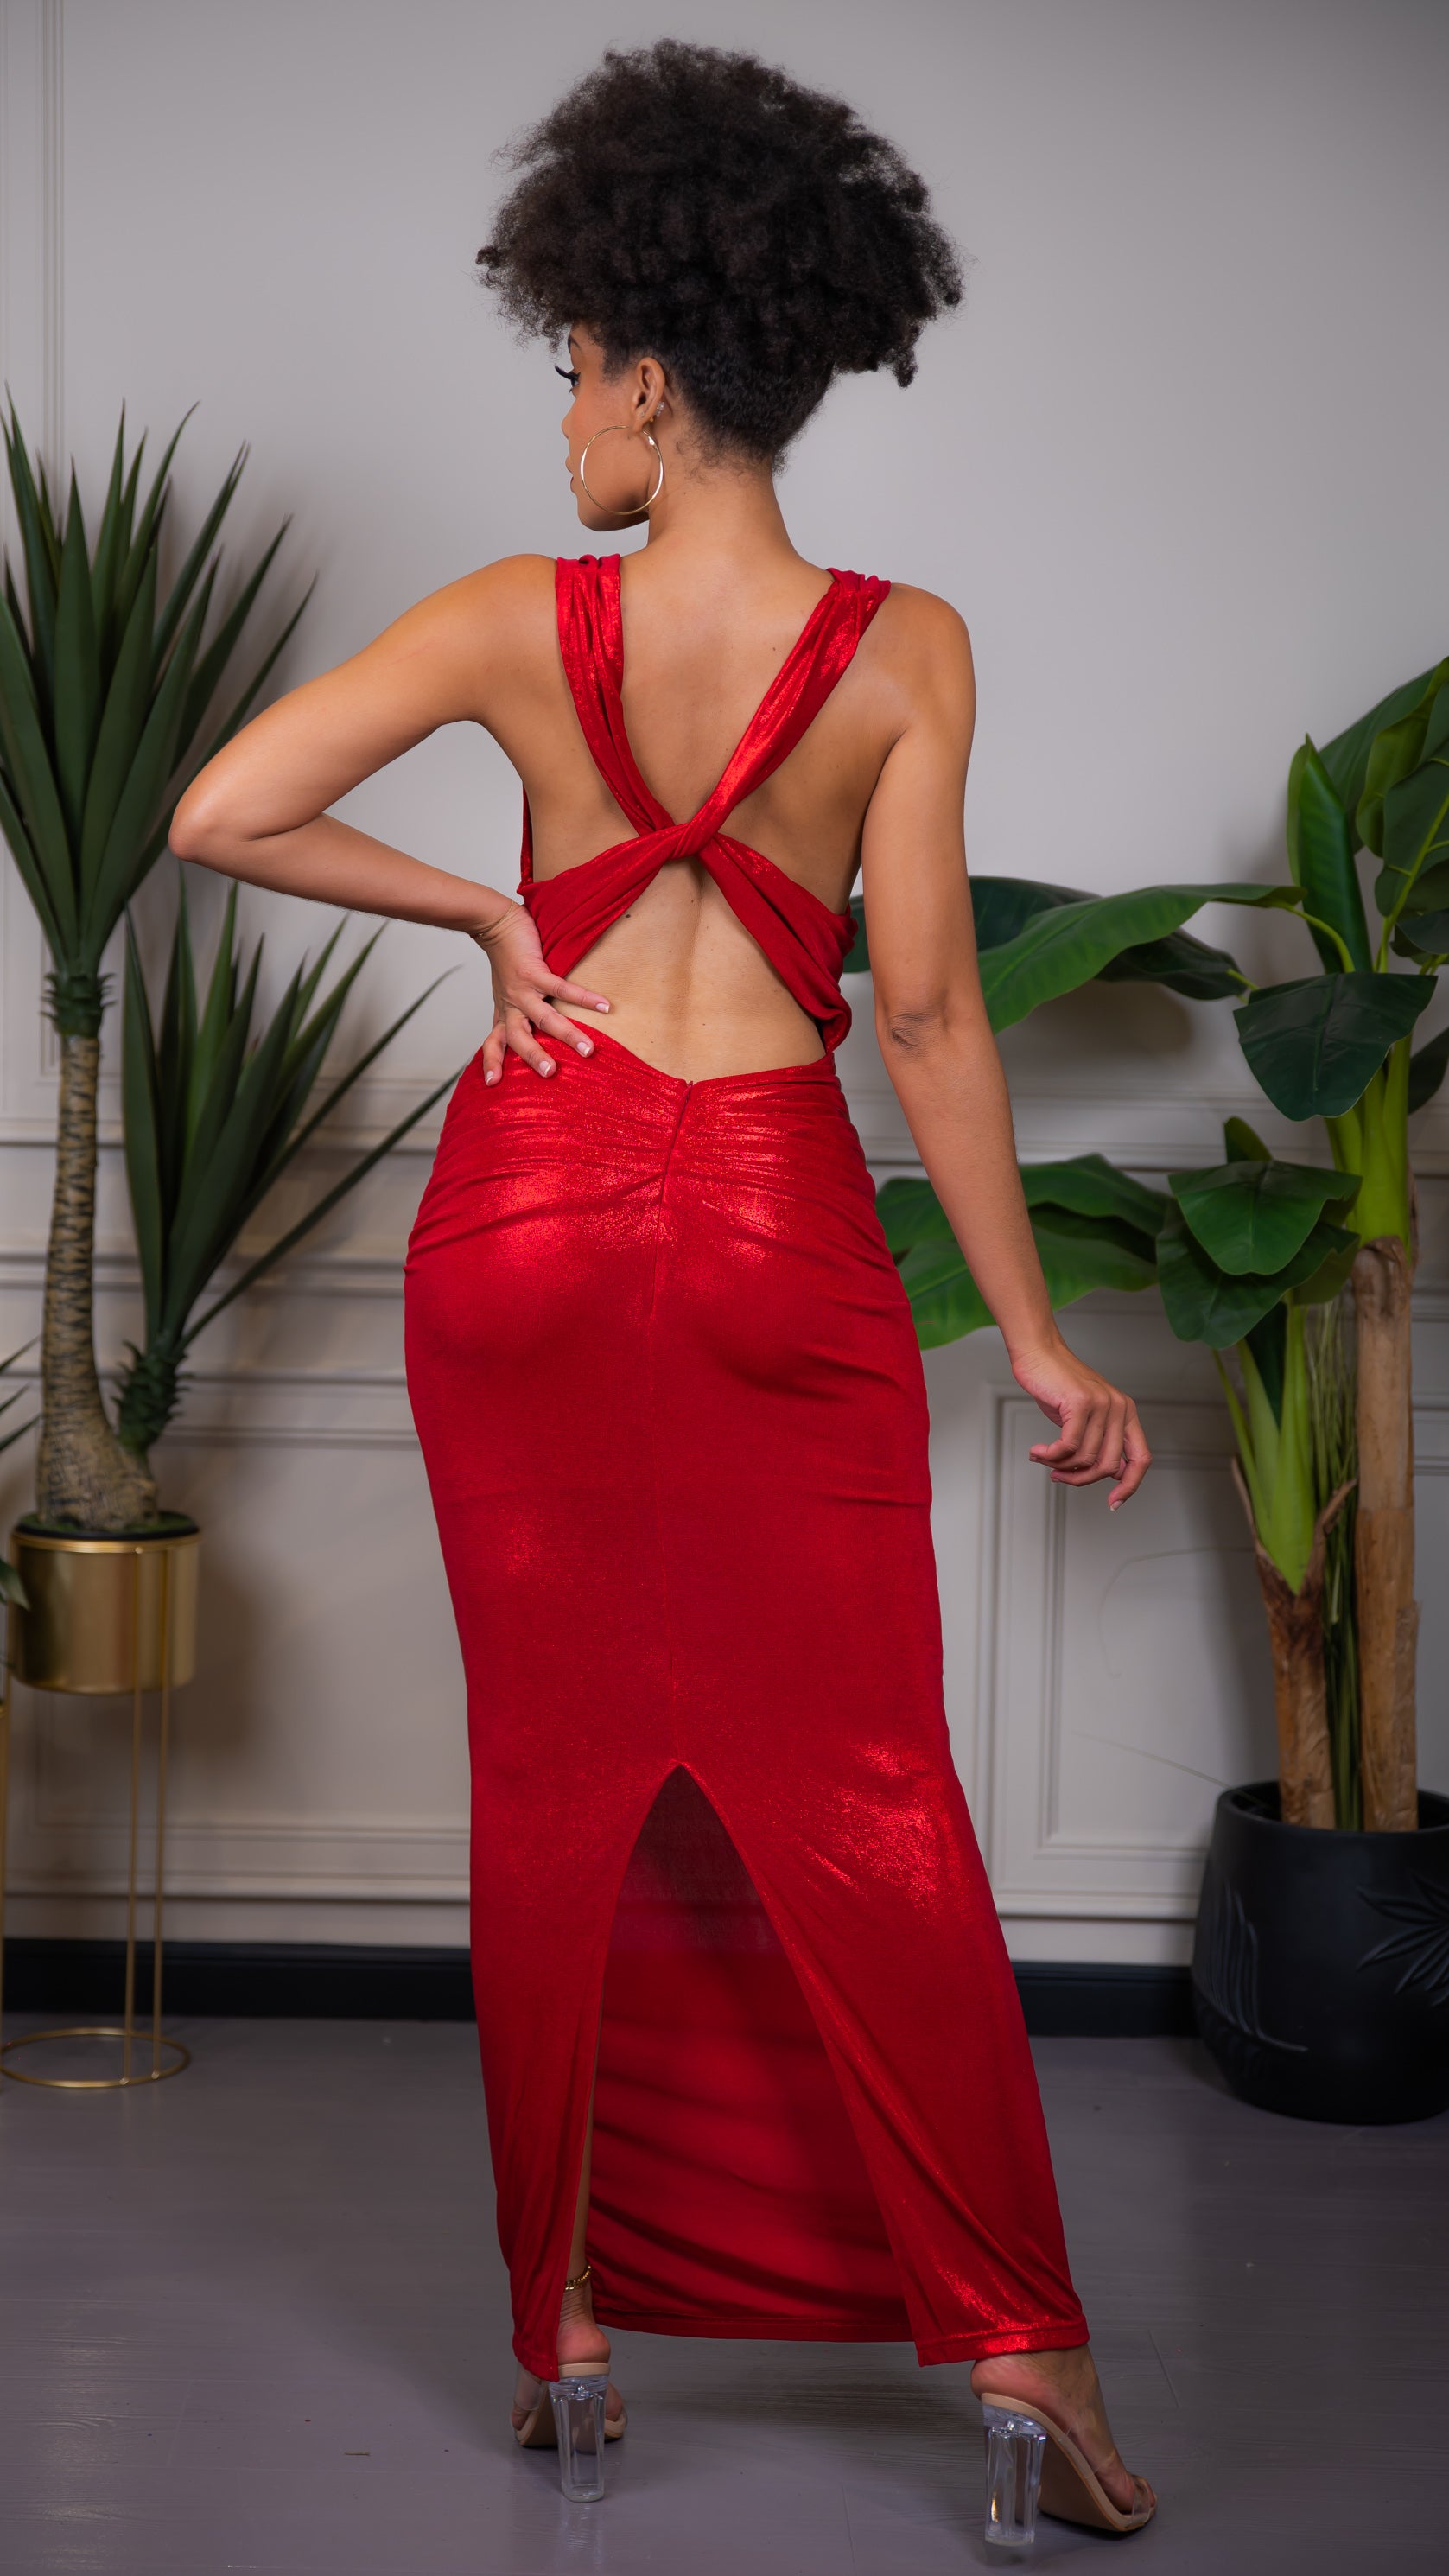 Sumptuous in red